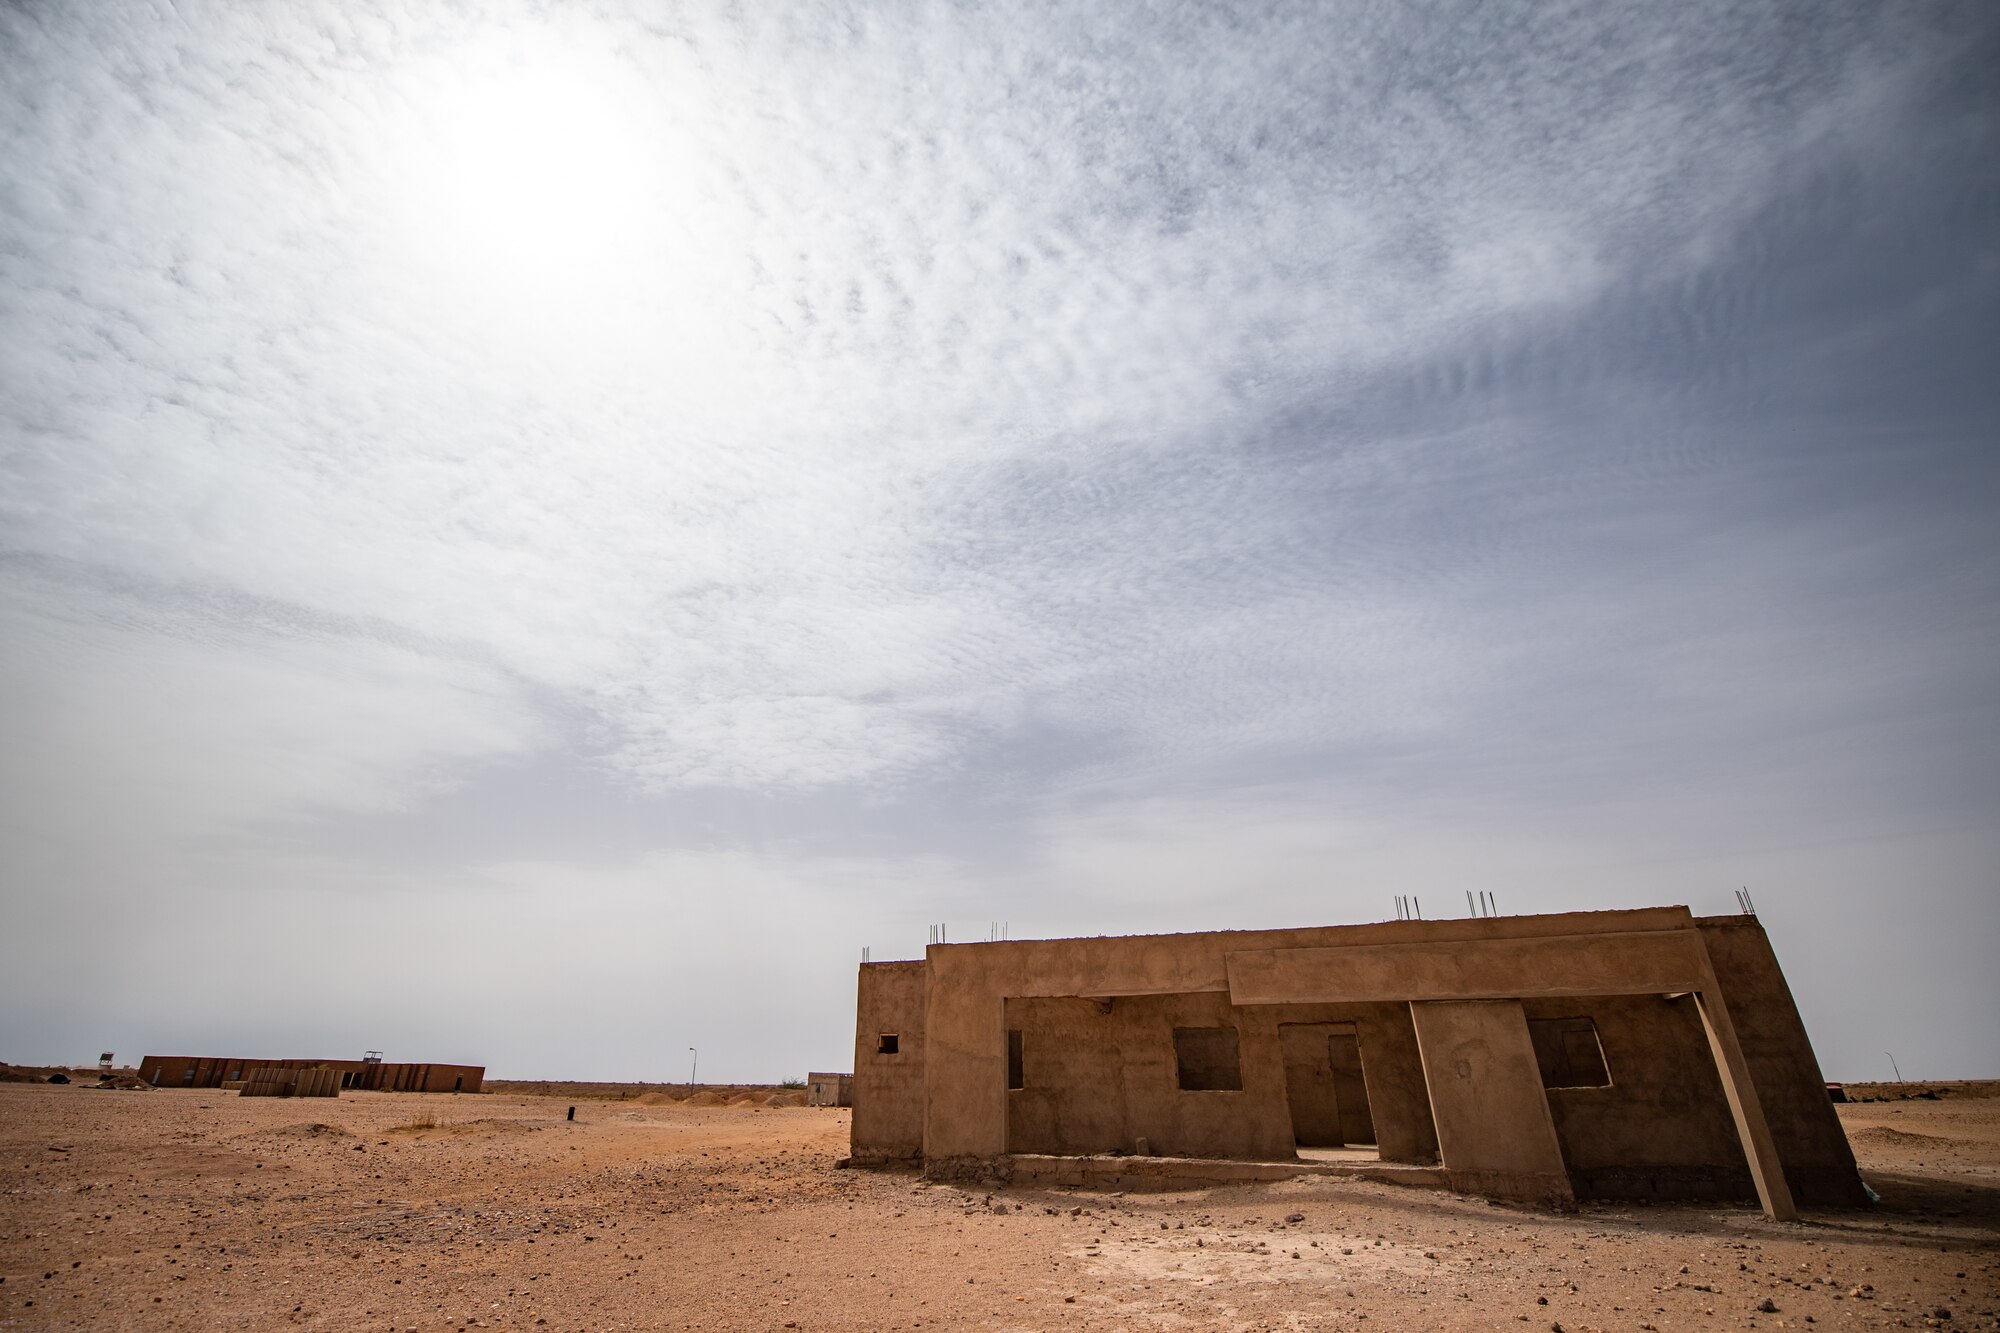 A training building stands in the Niger Armed Forces (French language: Forces Armées Nigeriennes) compound on Nigerien Air Base 201 in Agadez, Niger, July 10, 2019. The 409th Expeditionary Security Forces Squadron air advisors use the building to run training drills with the FAN. (U.S. Air Force photo by Staff Sgt. Devin Boyer)